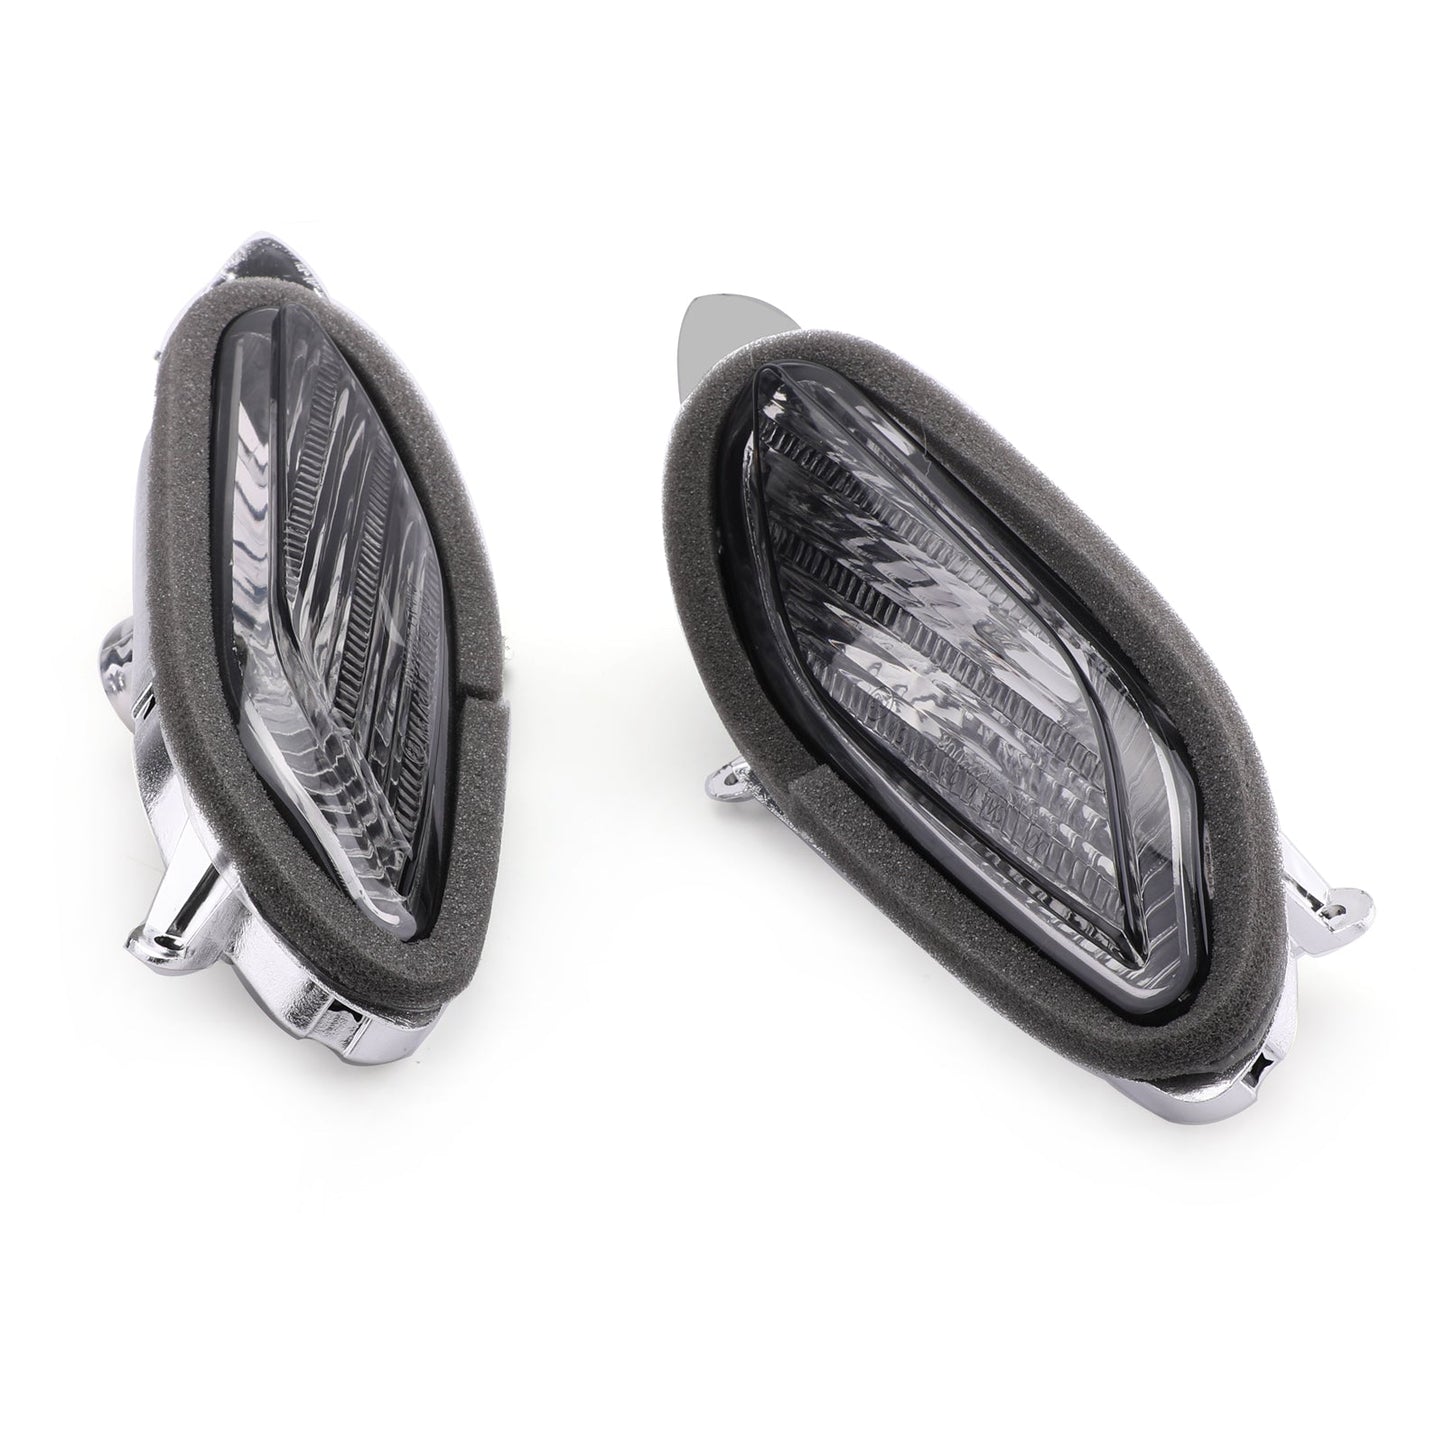 Front Turn Signals Lens For Honda ST1300 2002-2009 Clear